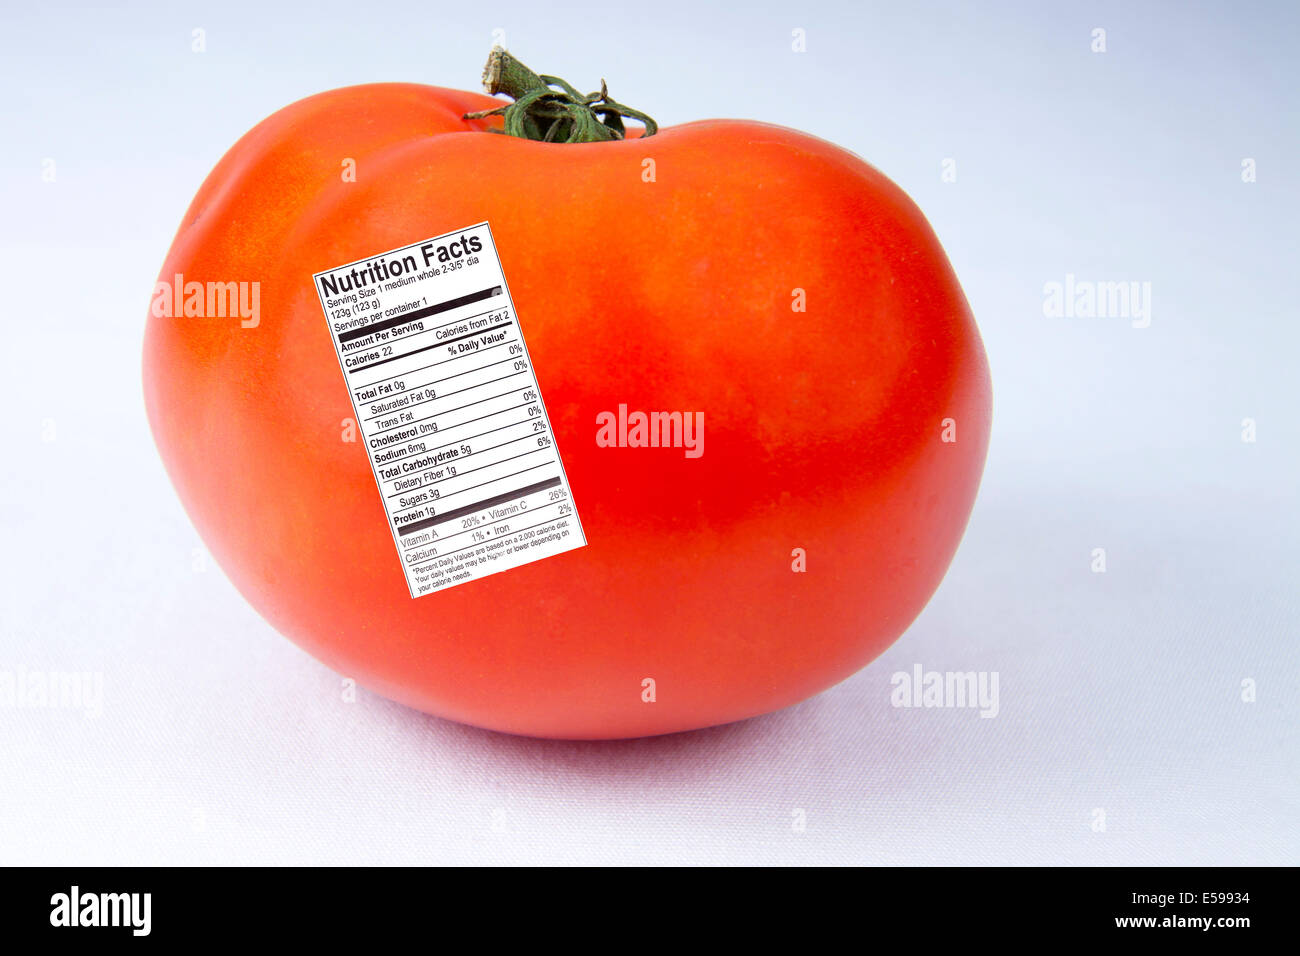 Red, ripe tomato with nutrition fact label attached Stock Photo